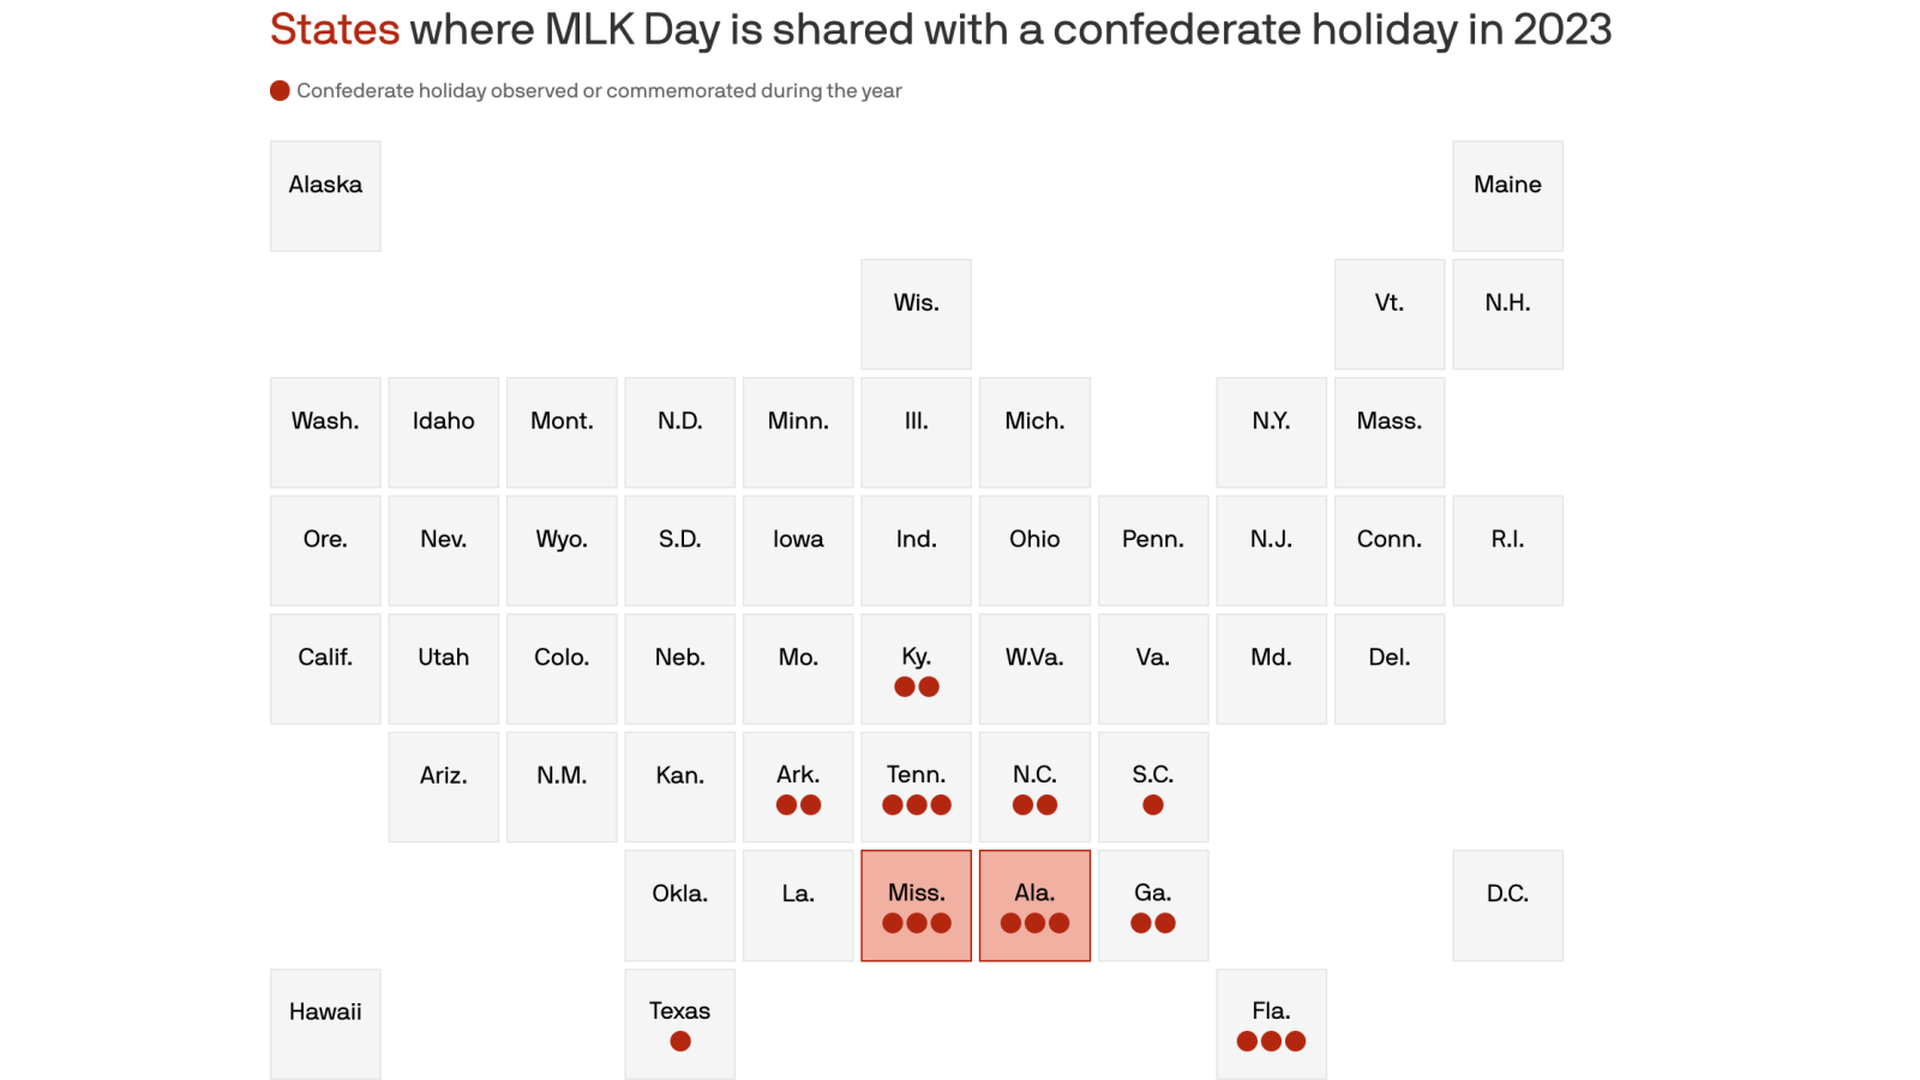 A cartogram that shows Mississippi and Alabama will observe both Martin Luther King, Jr. Day and a confederate holiday on the same day in 2023.